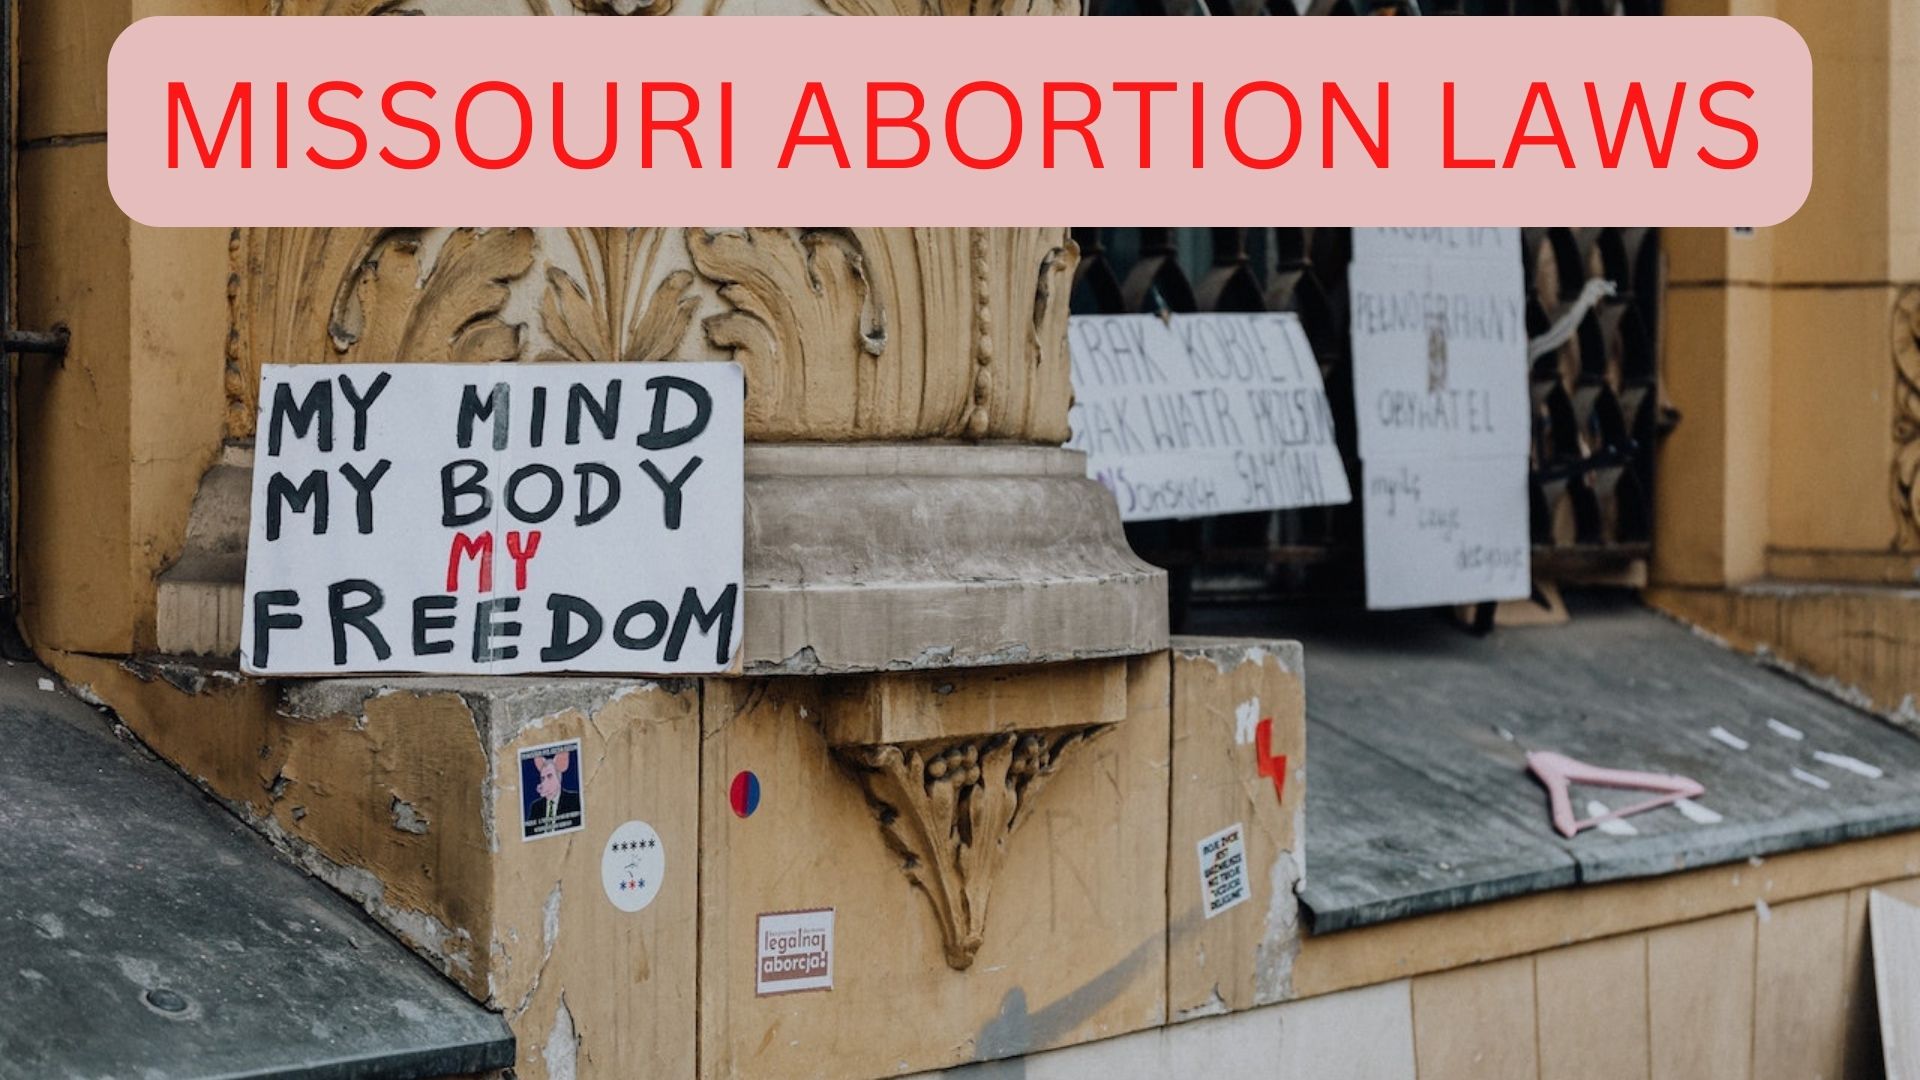 Missouri Abortion Laws - How Is It Different From The Other States